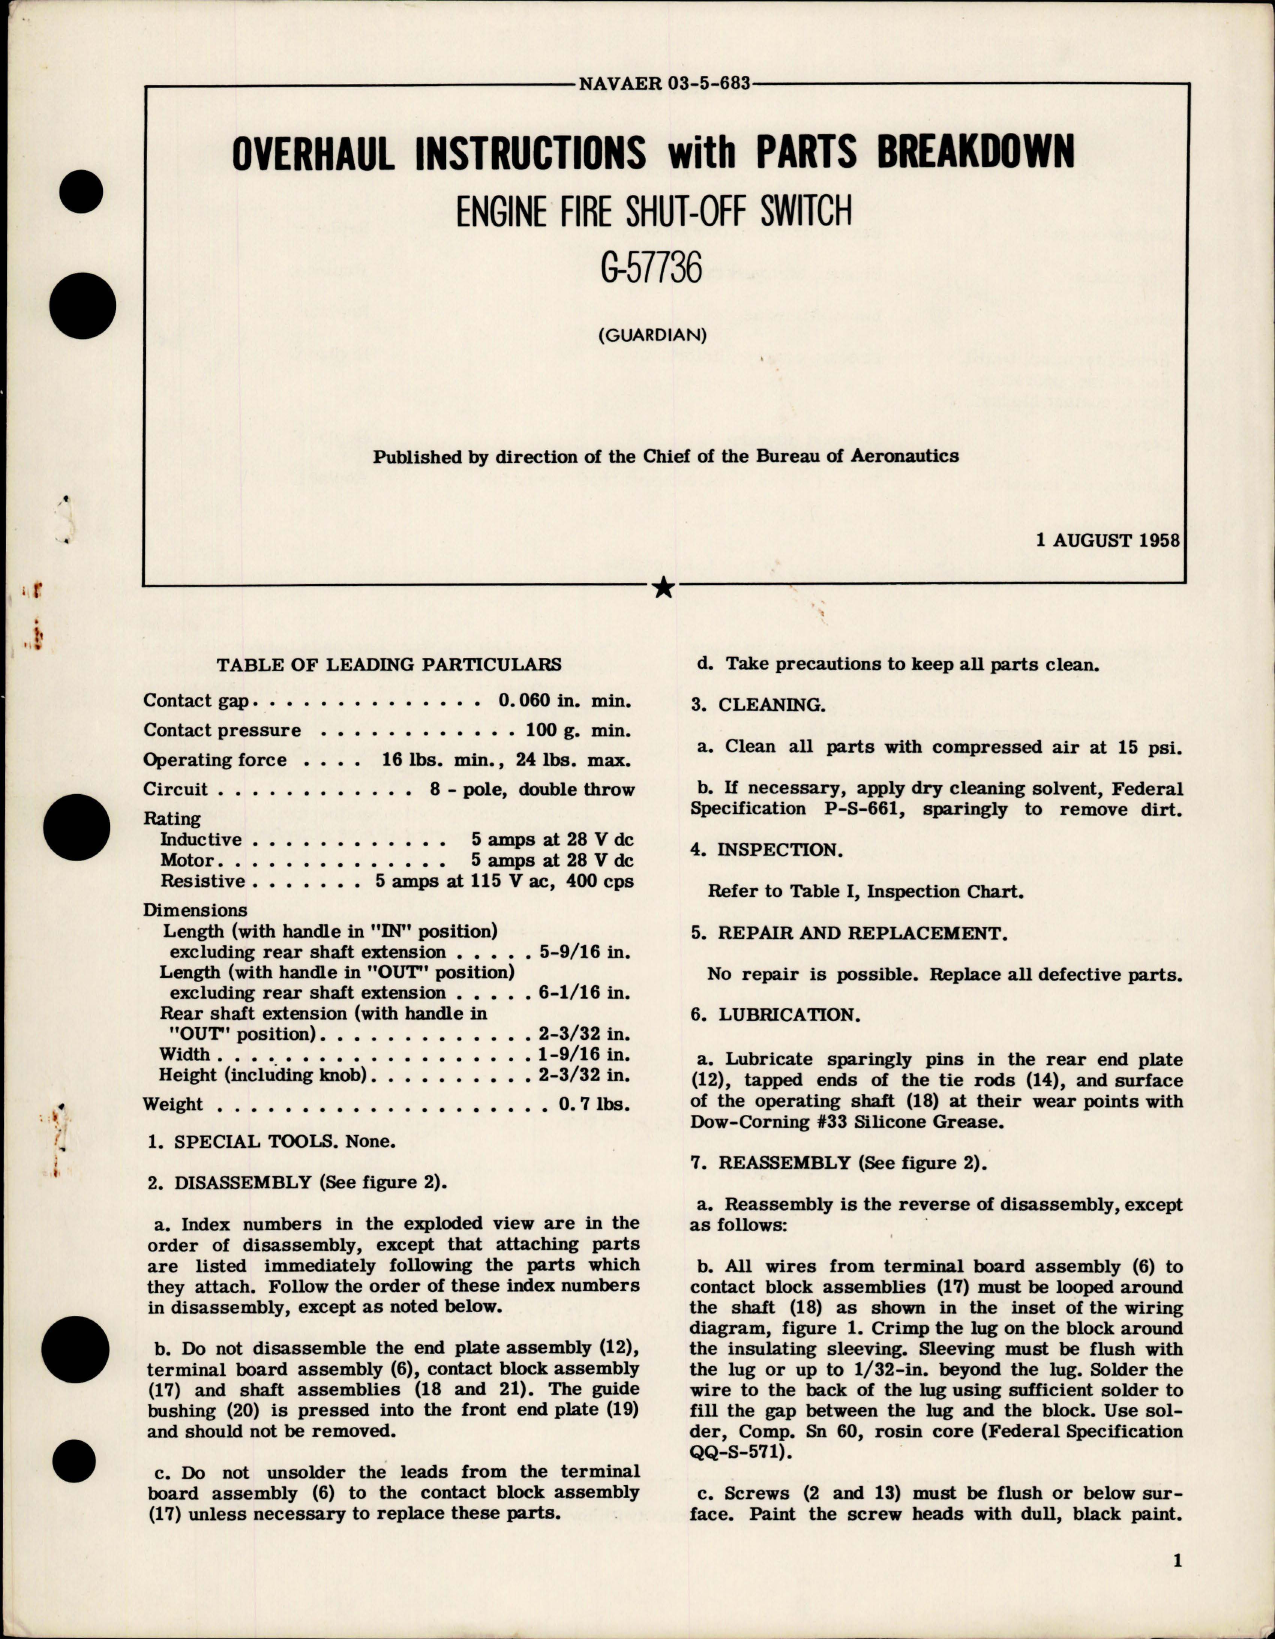 Sample page 1 from AirCorps Library document: Overhaul Instructions with Parts Breakdown for Engine Fire Shut Off  Switch - G-57736 